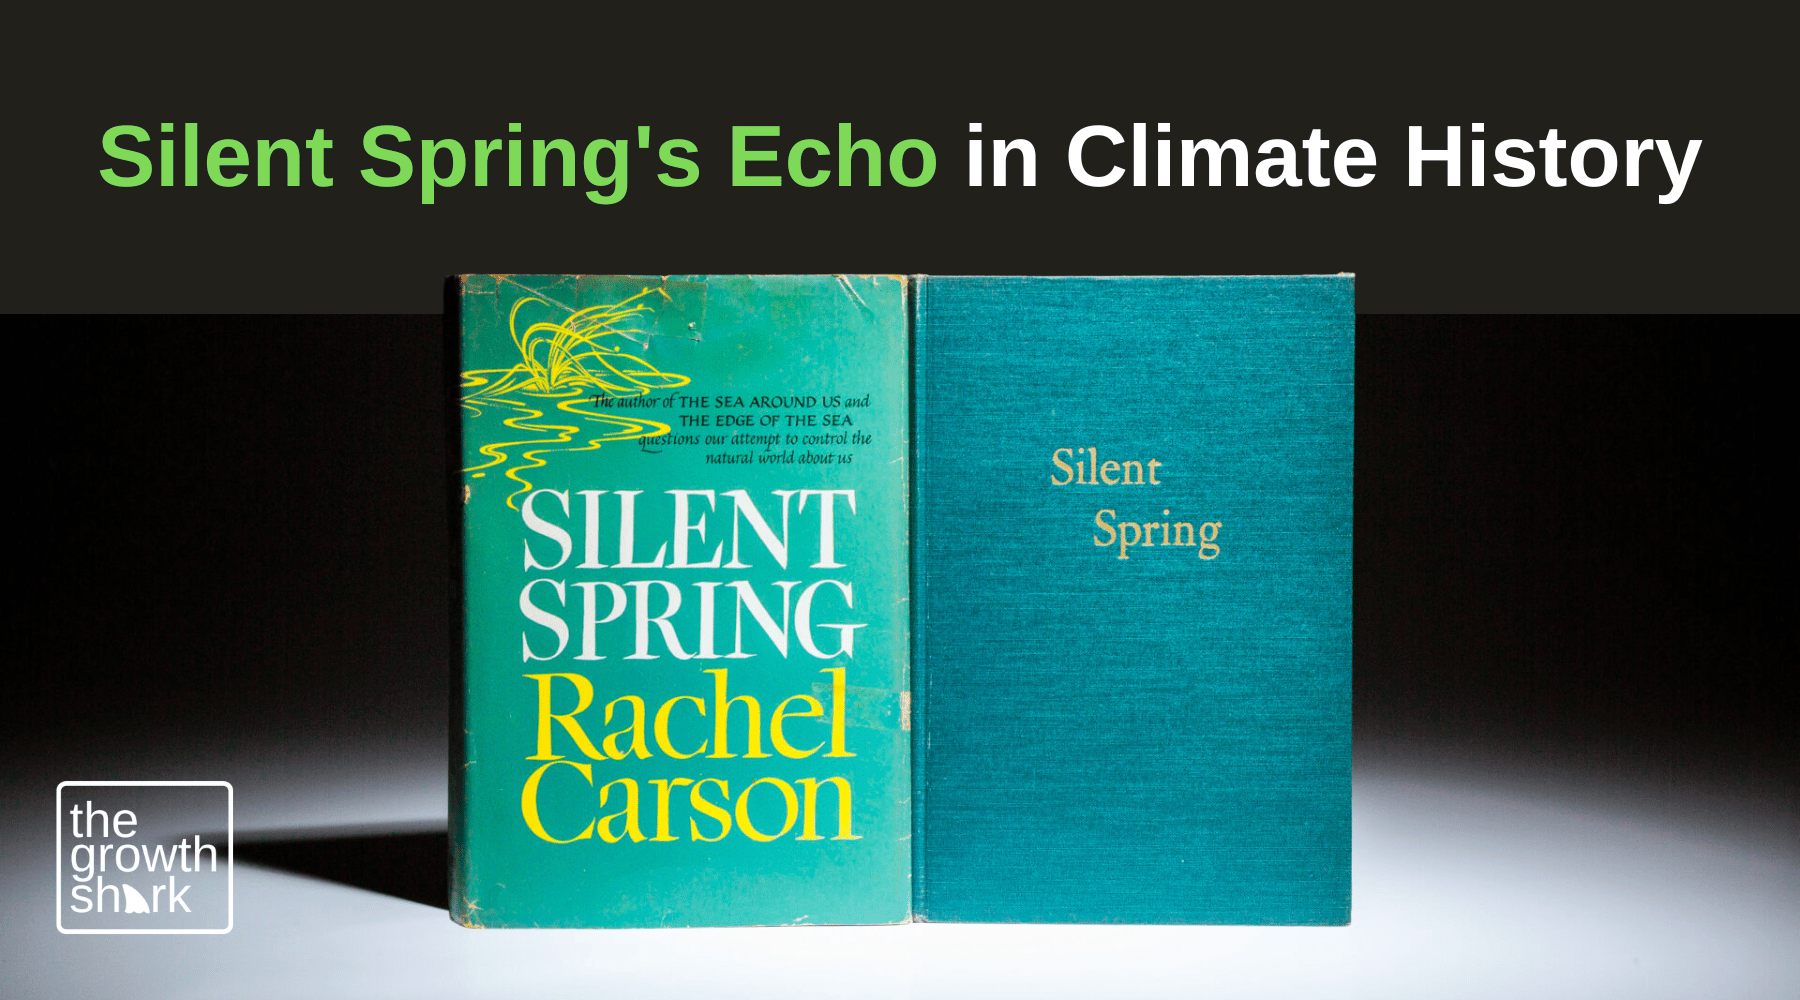 Silent Spring's Echo in Climate History